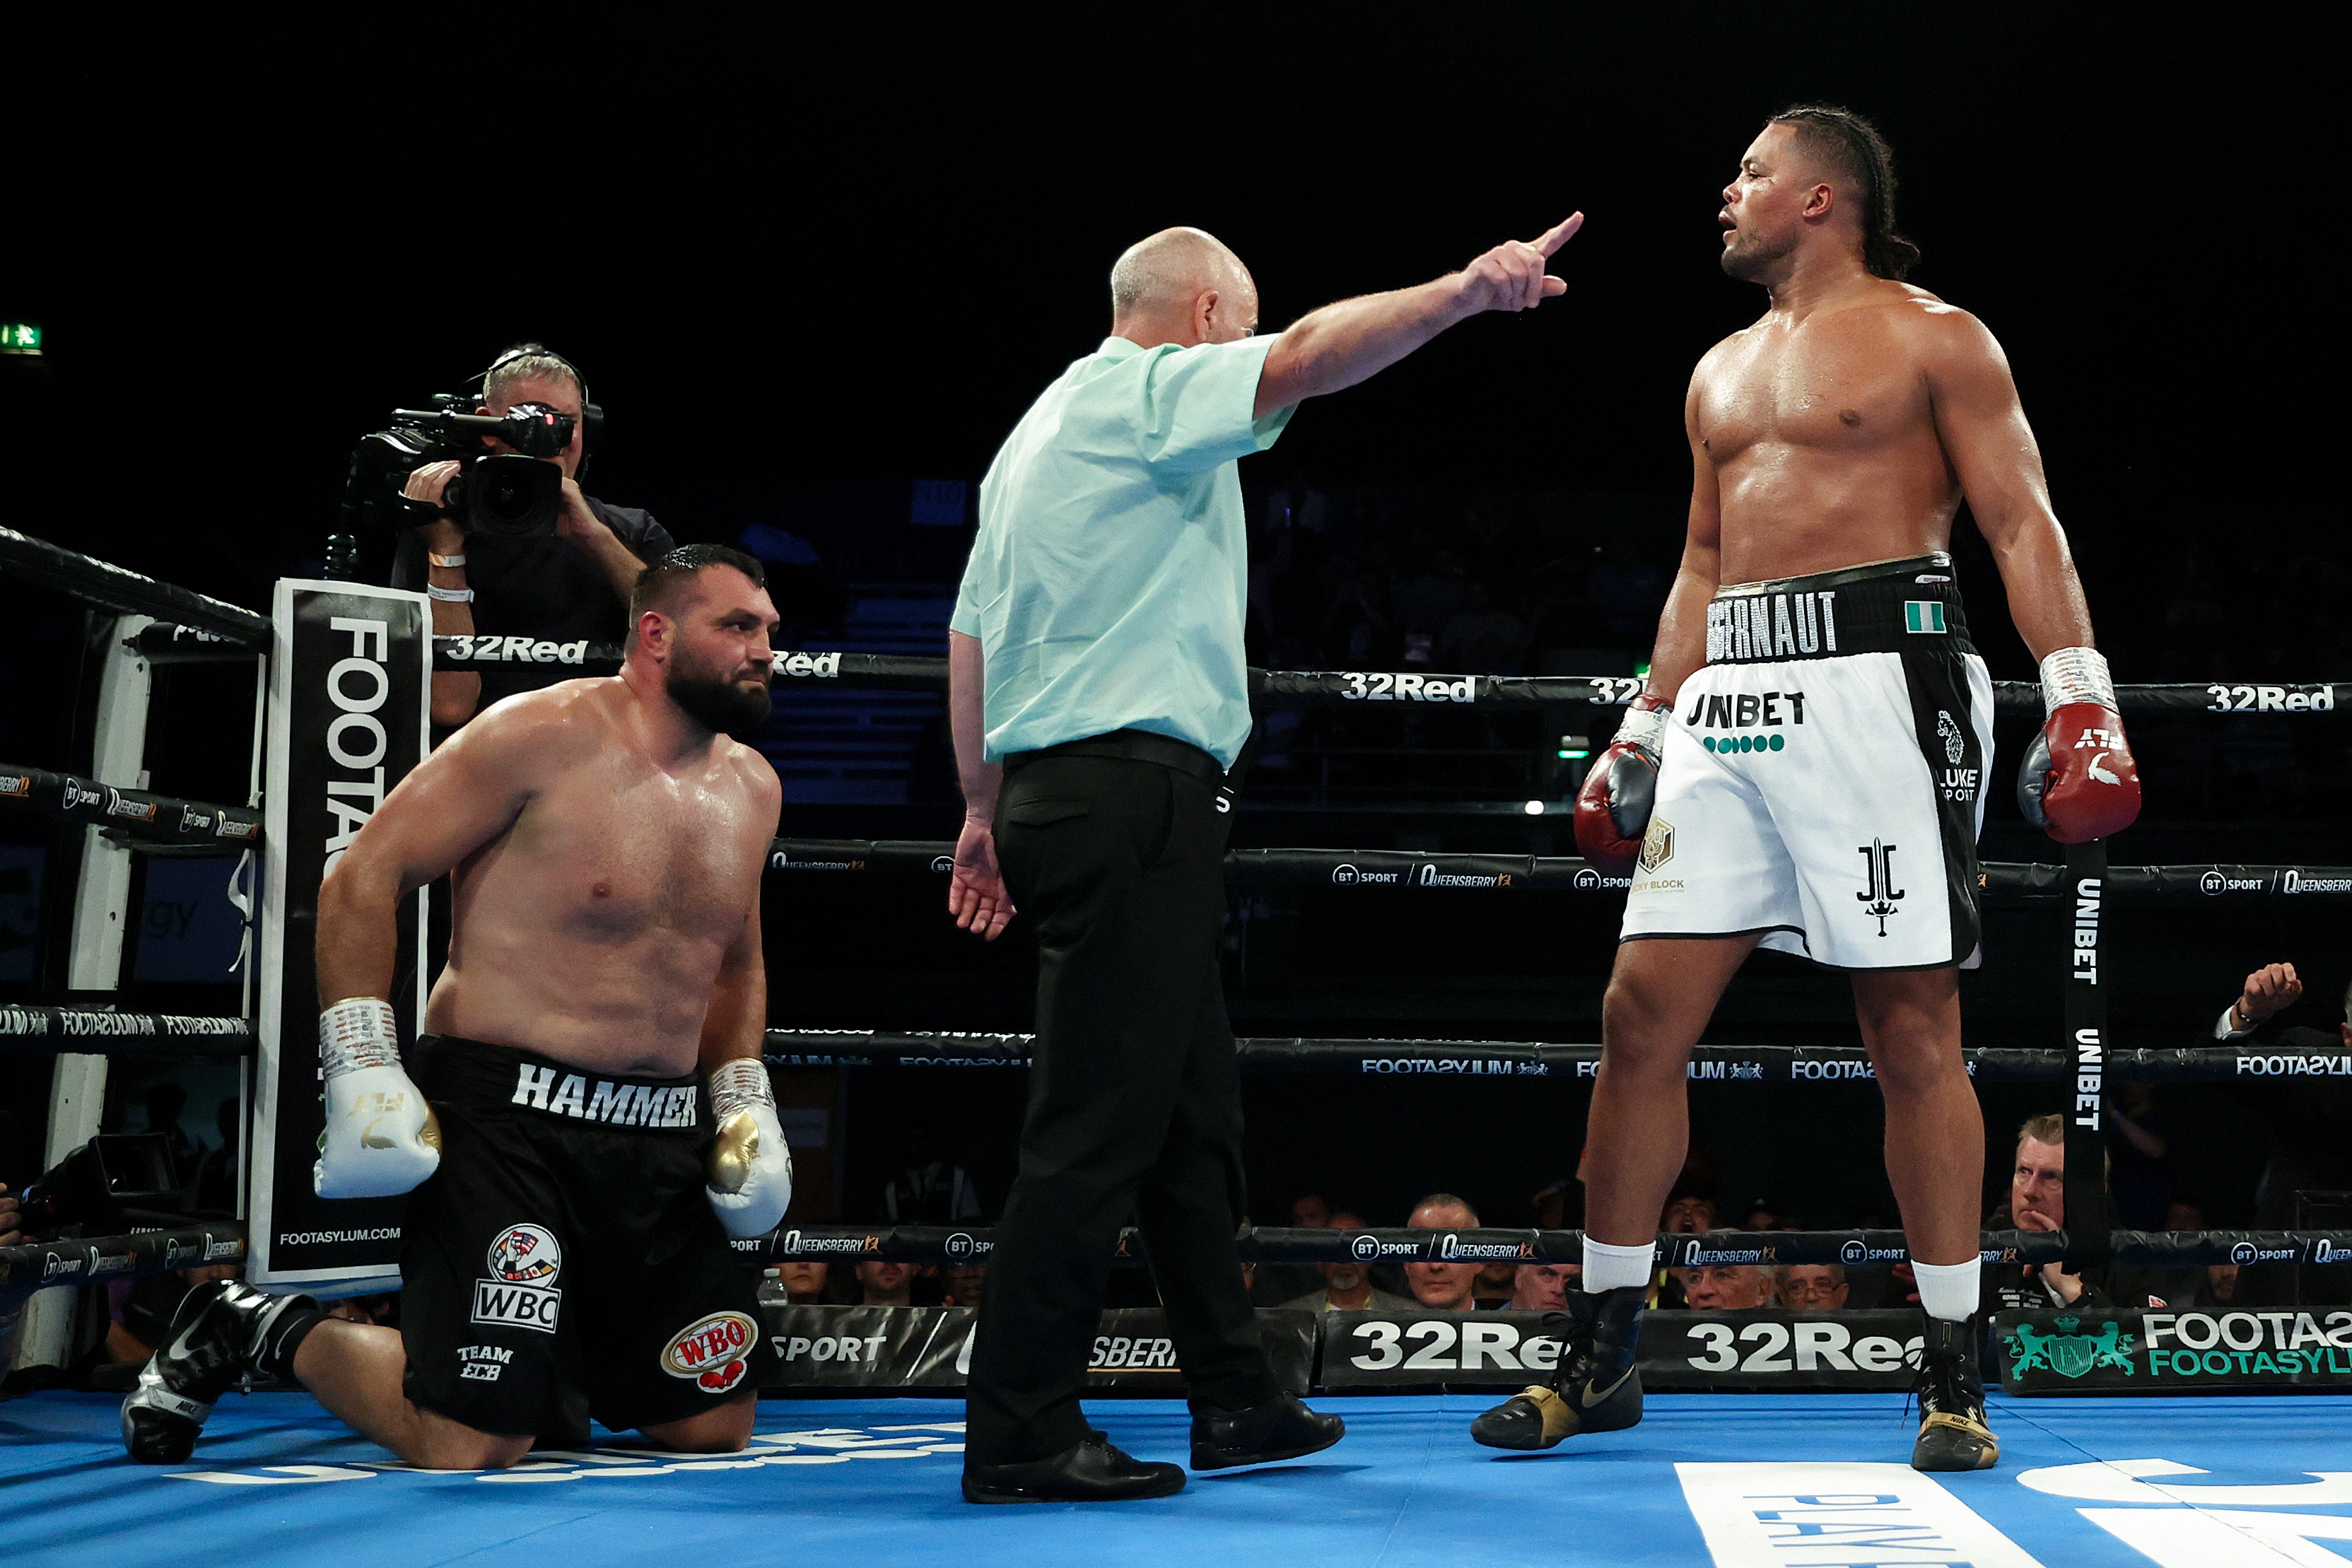 Joe Joyce reacts after knocking down Christian Hammer during the WBC Silver Silver and WBO International Heavyweight Title fight between Joe Joyce and Christian Hammer at OVO Arena Wembley on July 02, 2022 in London, England.